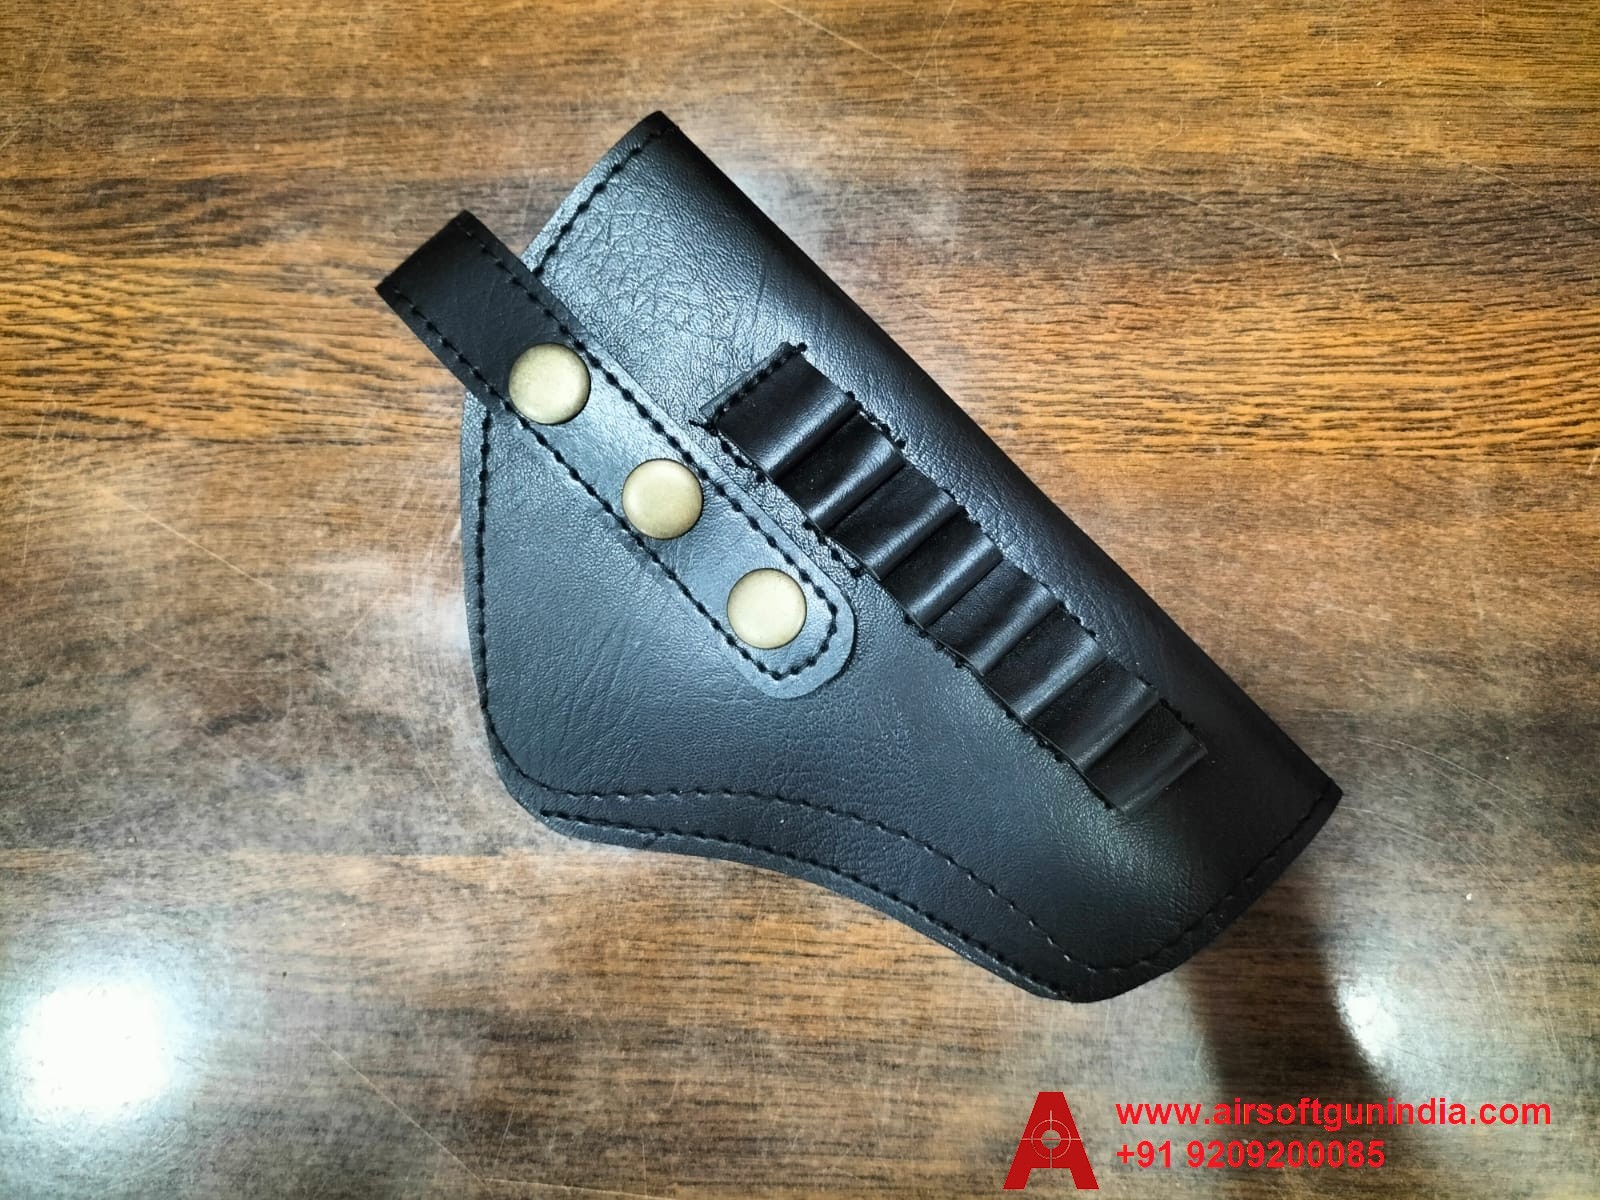 Gun Cover / Holster For Air Pistols And Revolvers In India Black